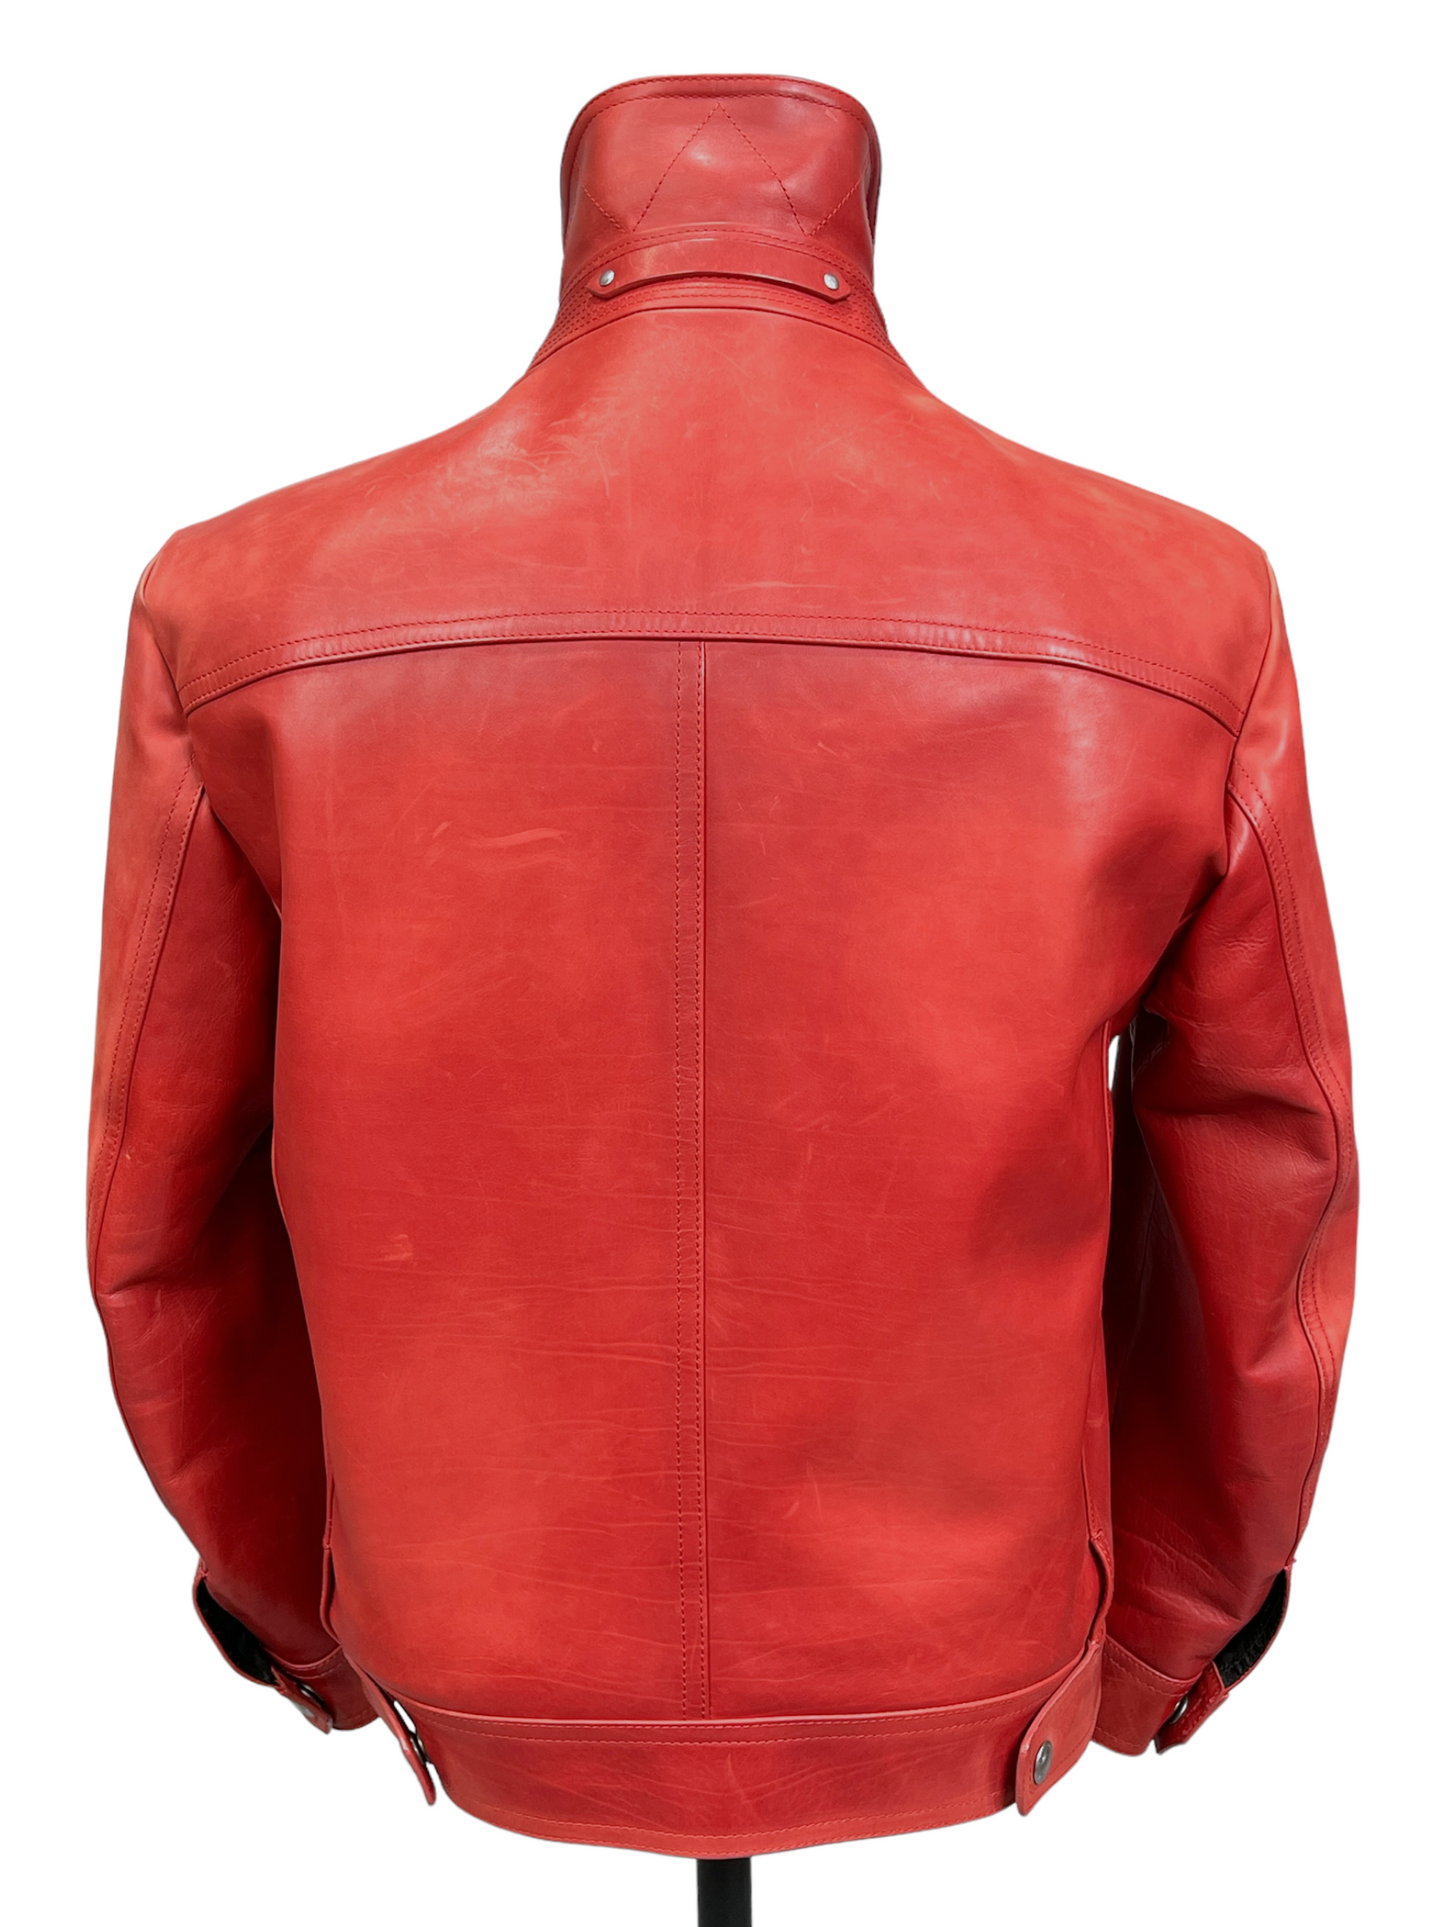 Tom Ford Red Embossed Calfskin Leather Trucker Jacket 40R / 50R — Genuine Design Luxury Consignment Calgary, Alberta, Canada New and Pre-Owned Clothing, Shoes, Accessories.